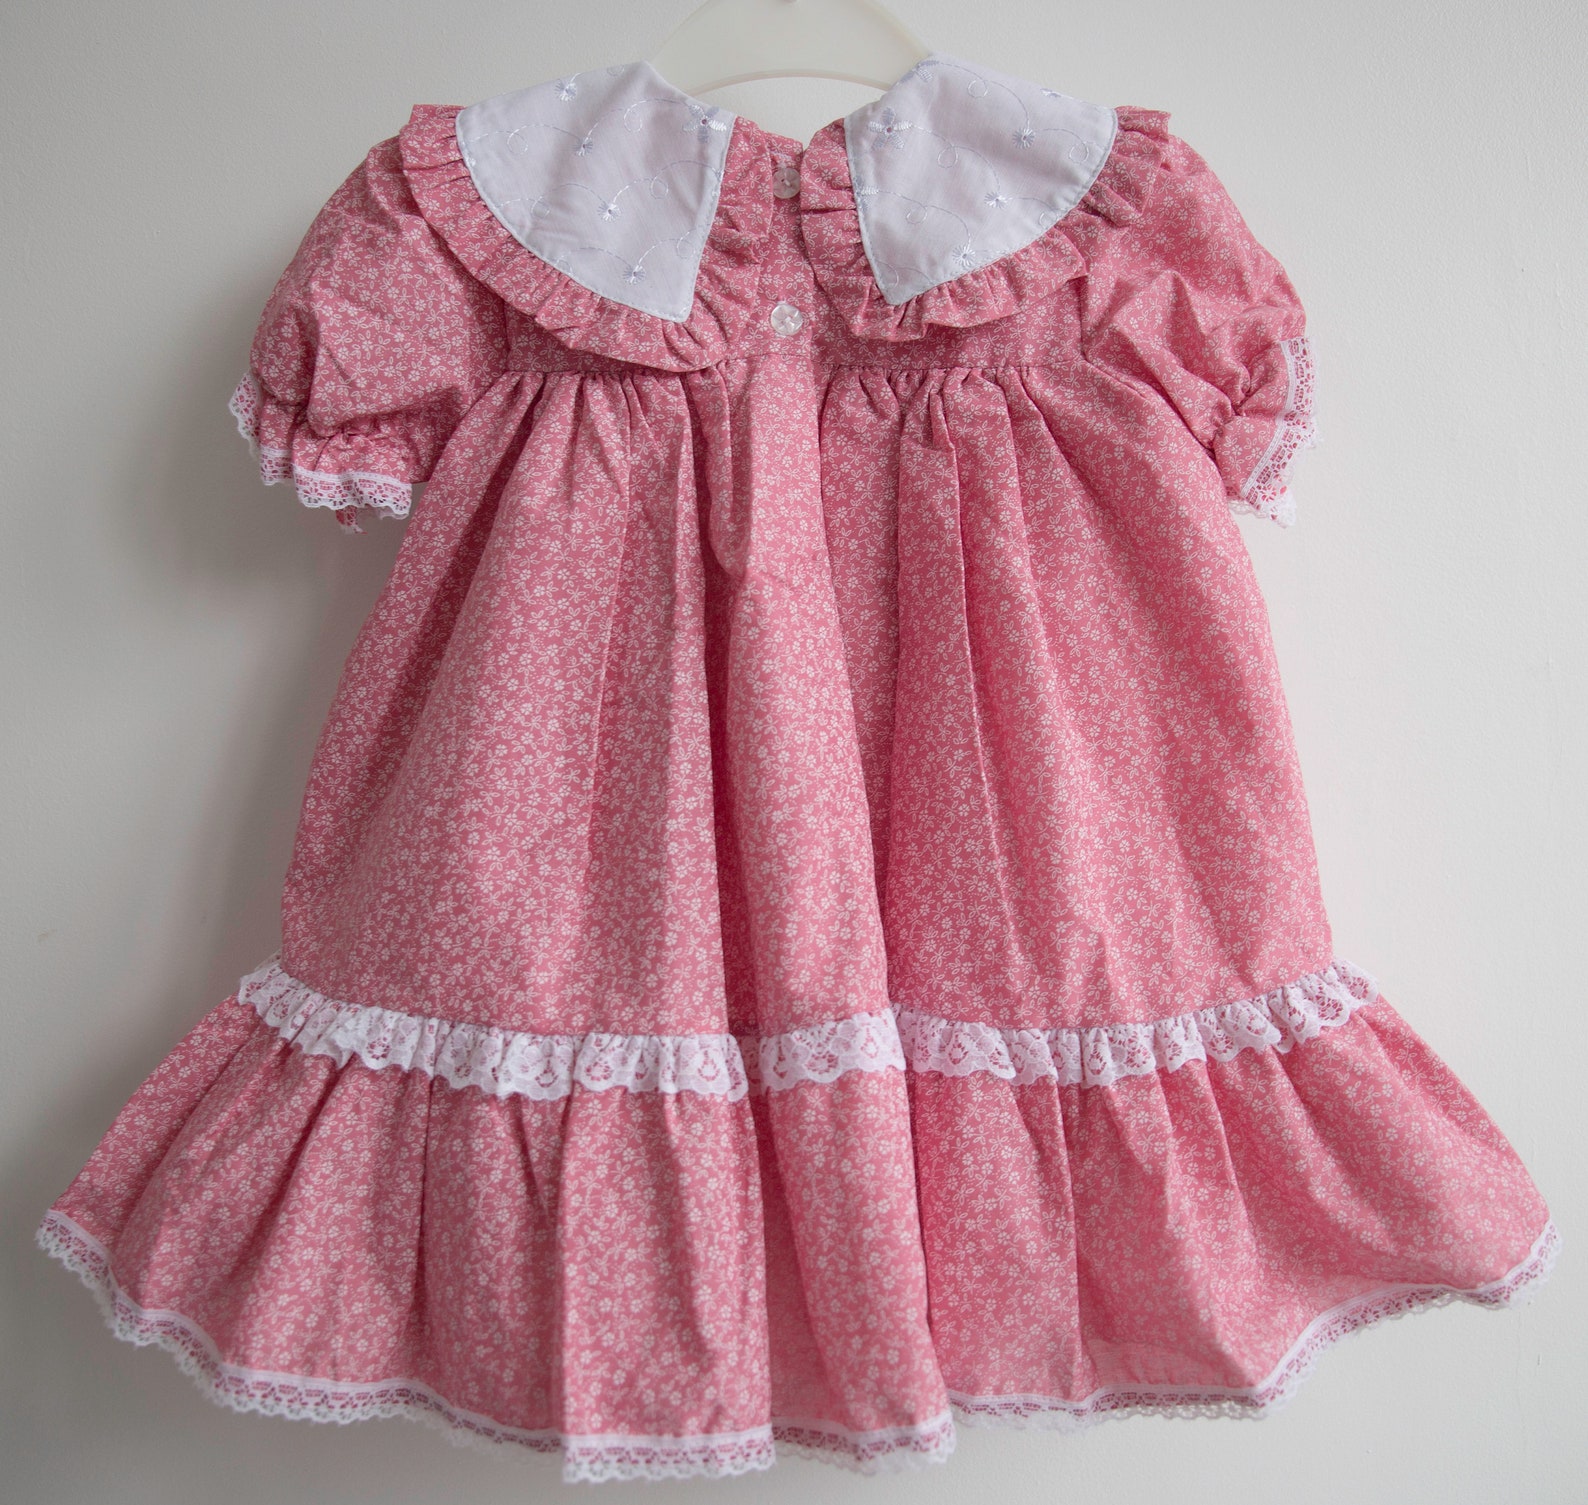 Pink Baby Girl's Dress Age 2yrs Cotton Toddler Romany - Etsy New Zealand